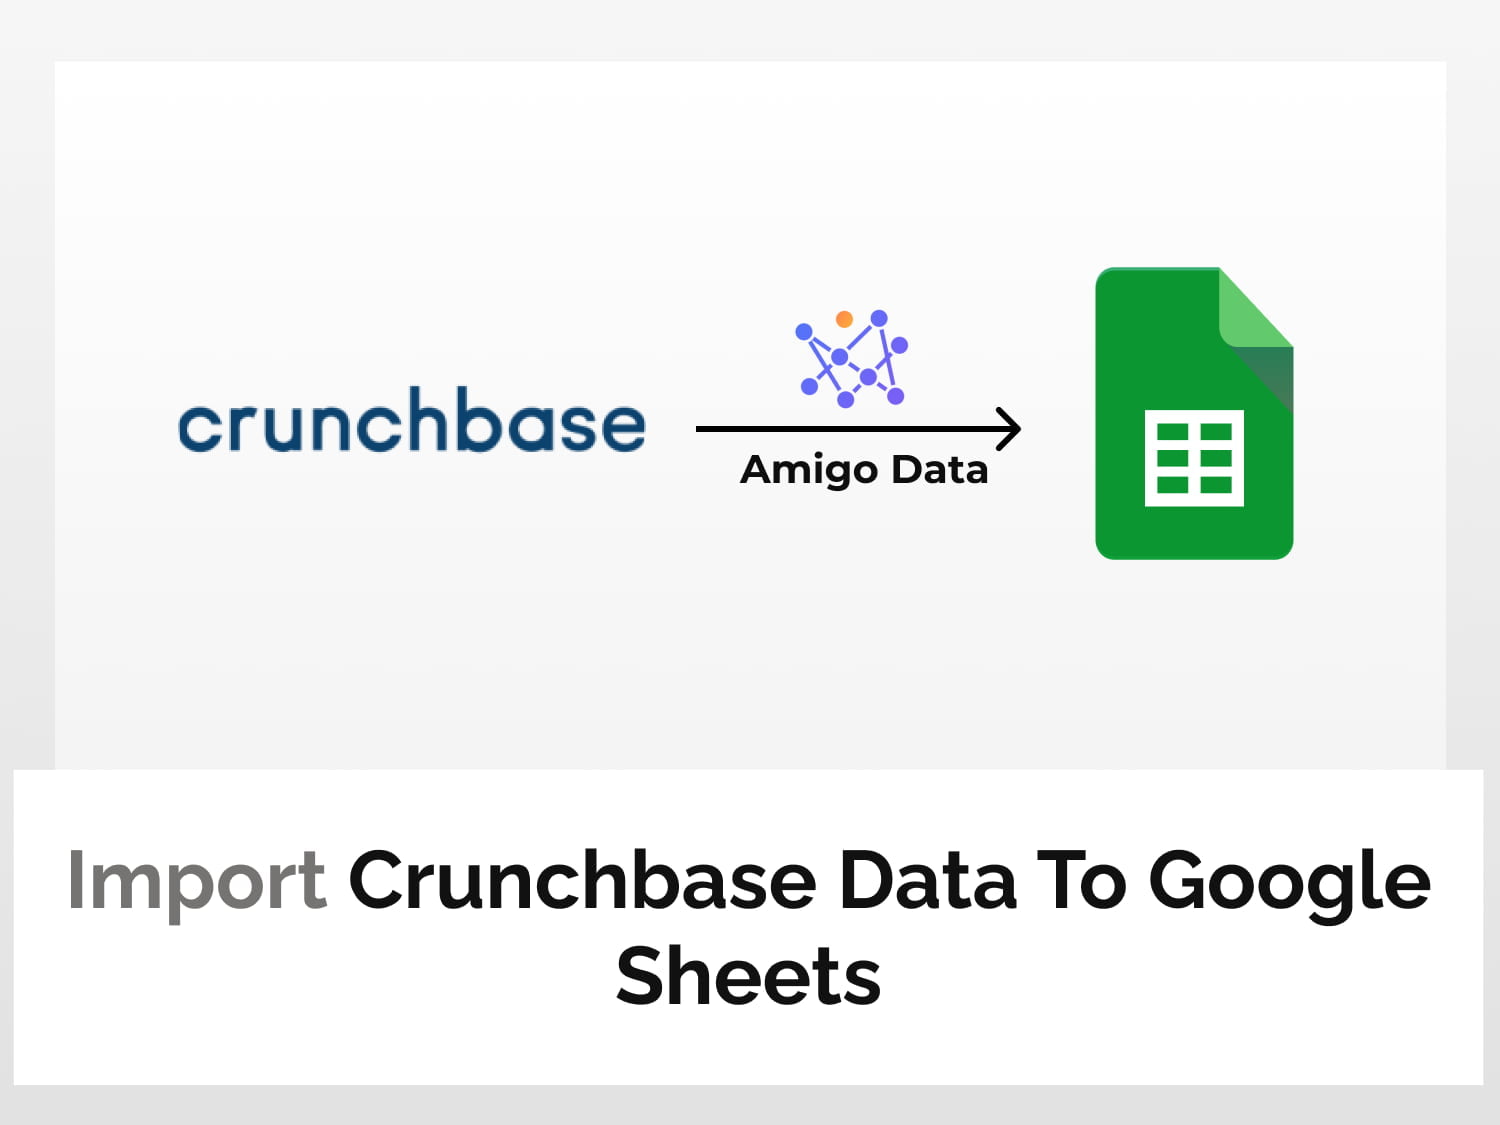 How to import Crunchbase data to Google Sheets